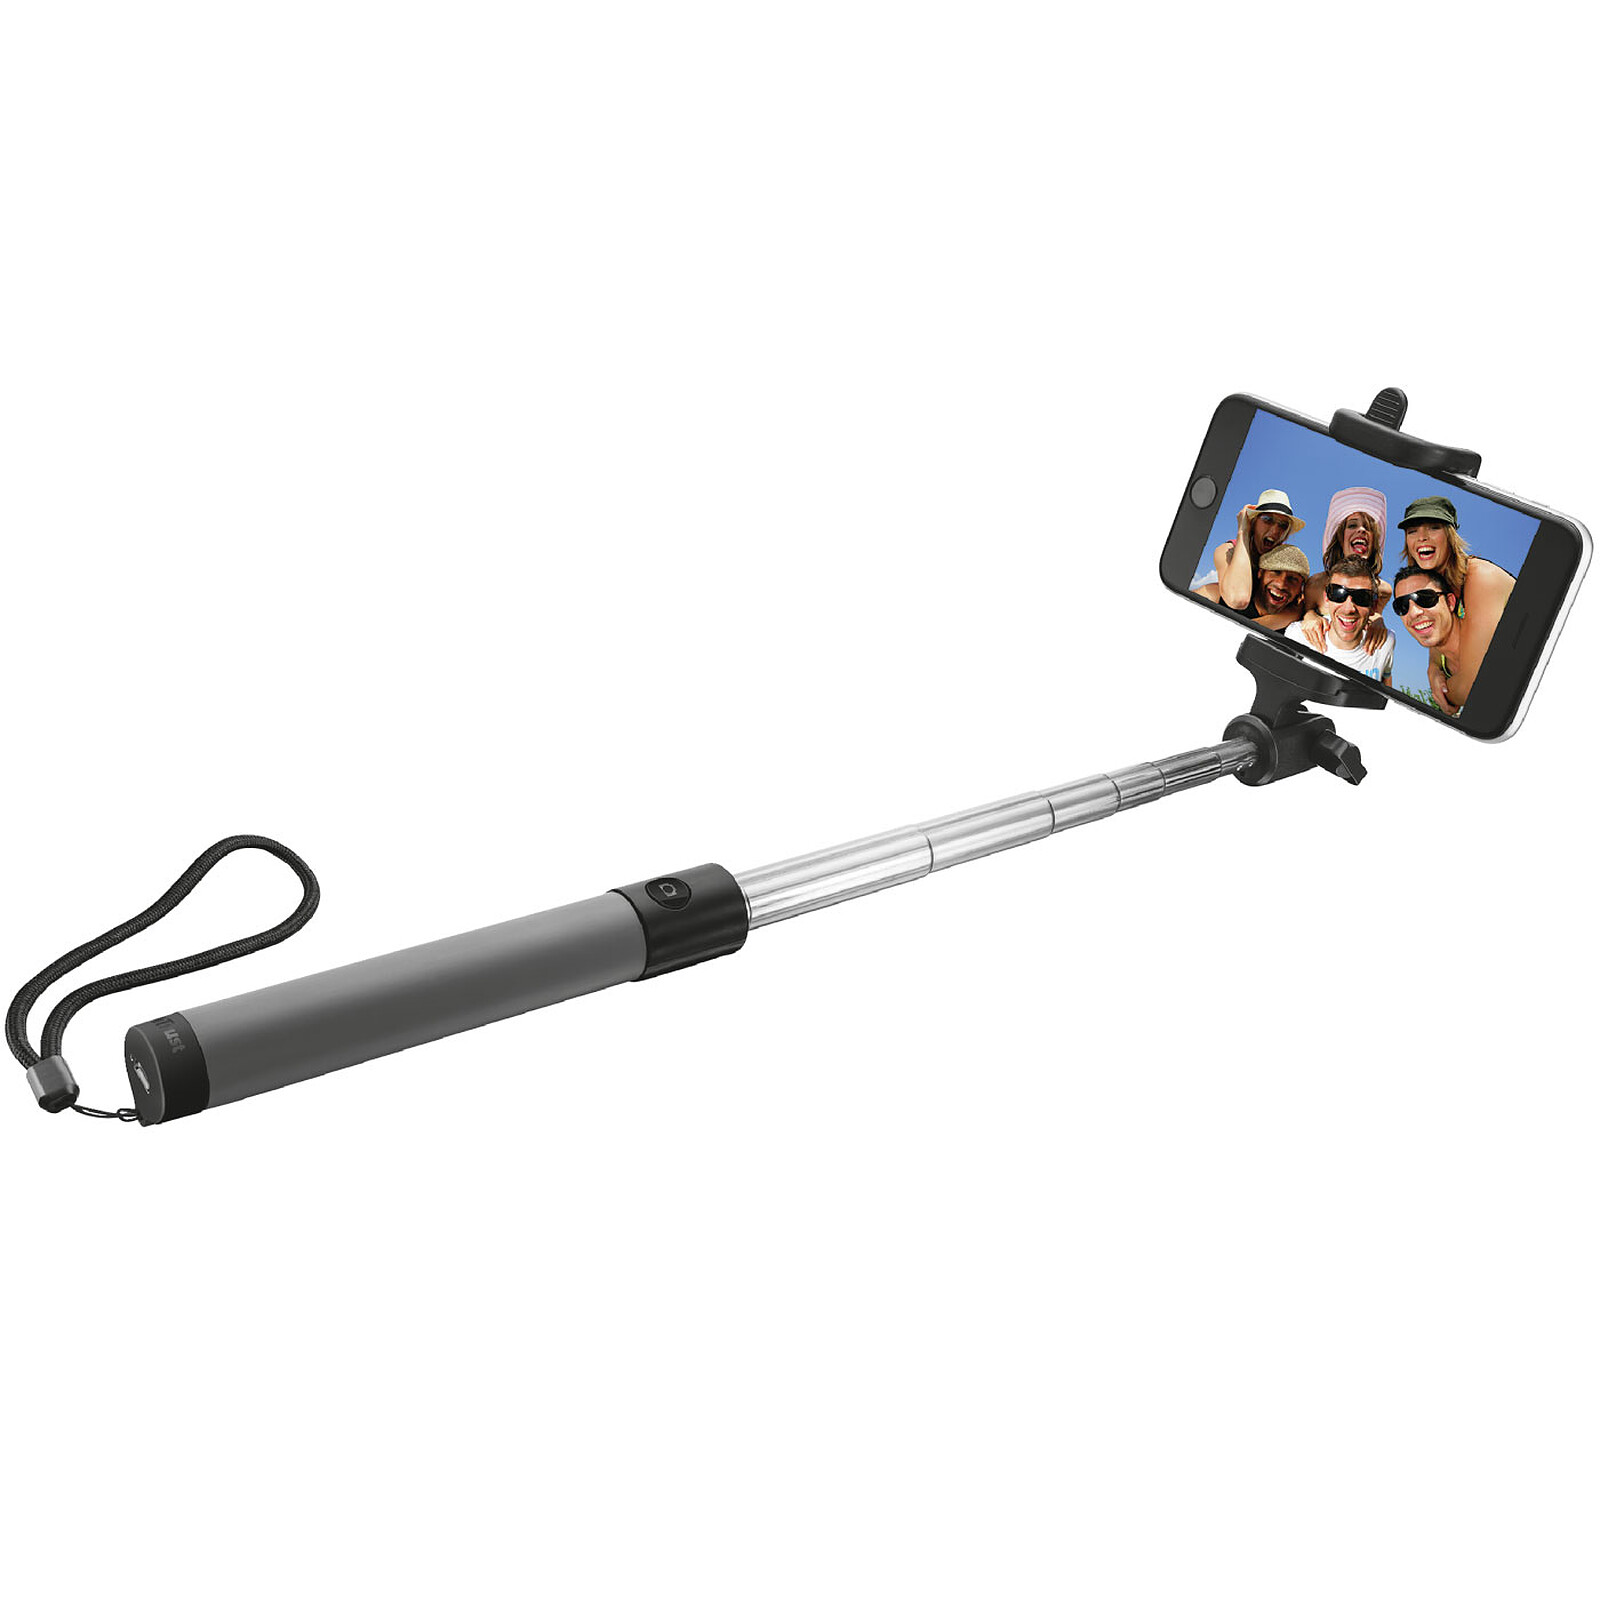 Camlink Pro Durable Selfie Stick Monopod for Iphone Android Smart Phone 